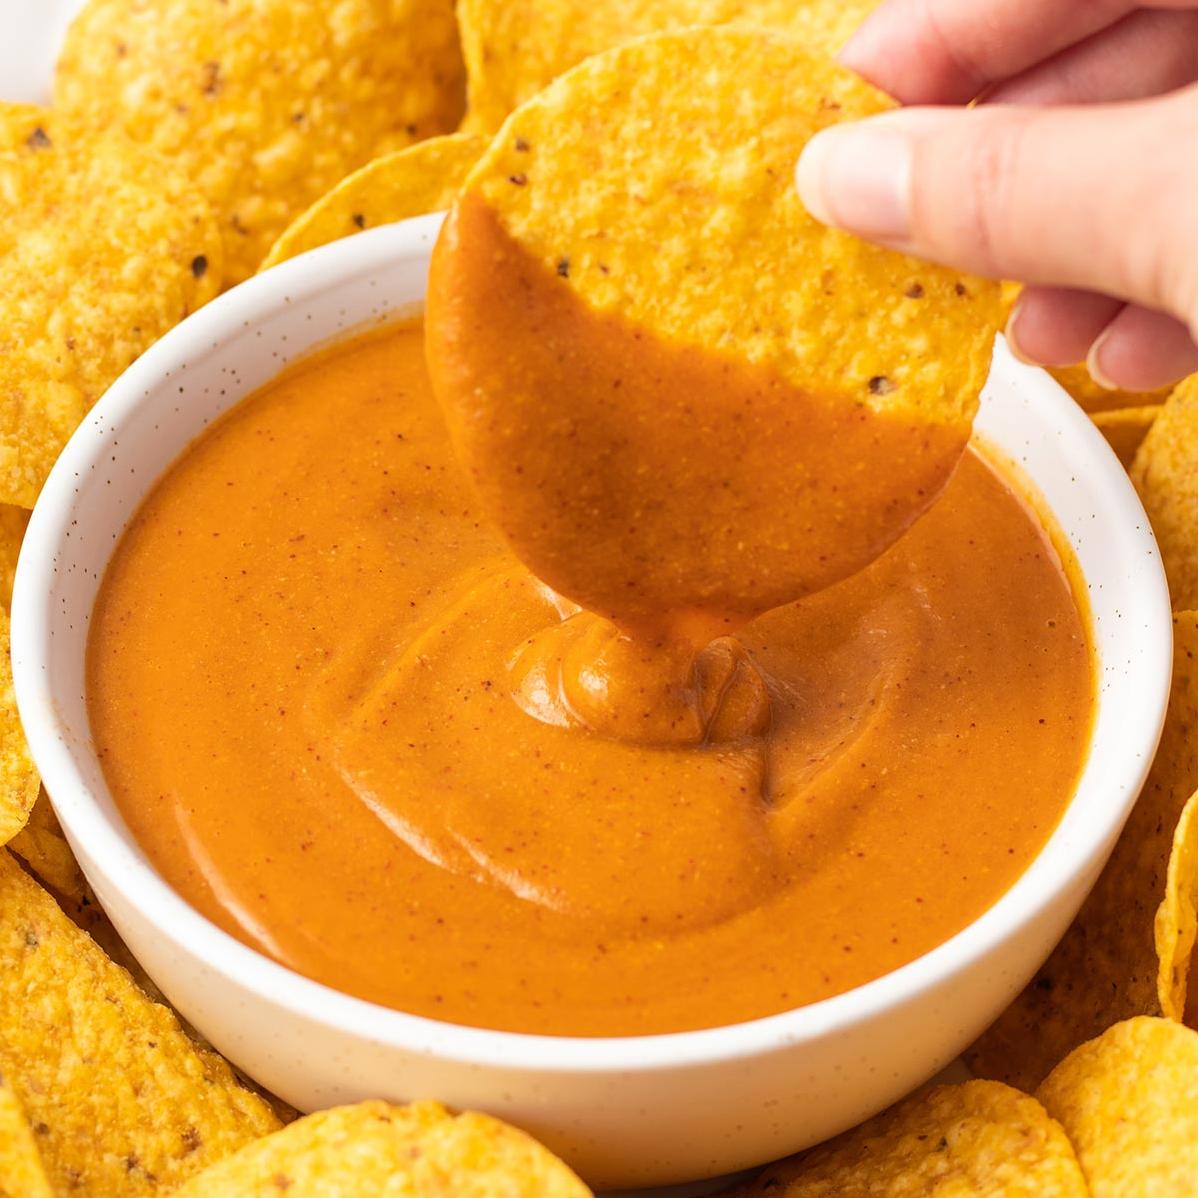  This vegan nacho cheese is perfect for dipping veggies.